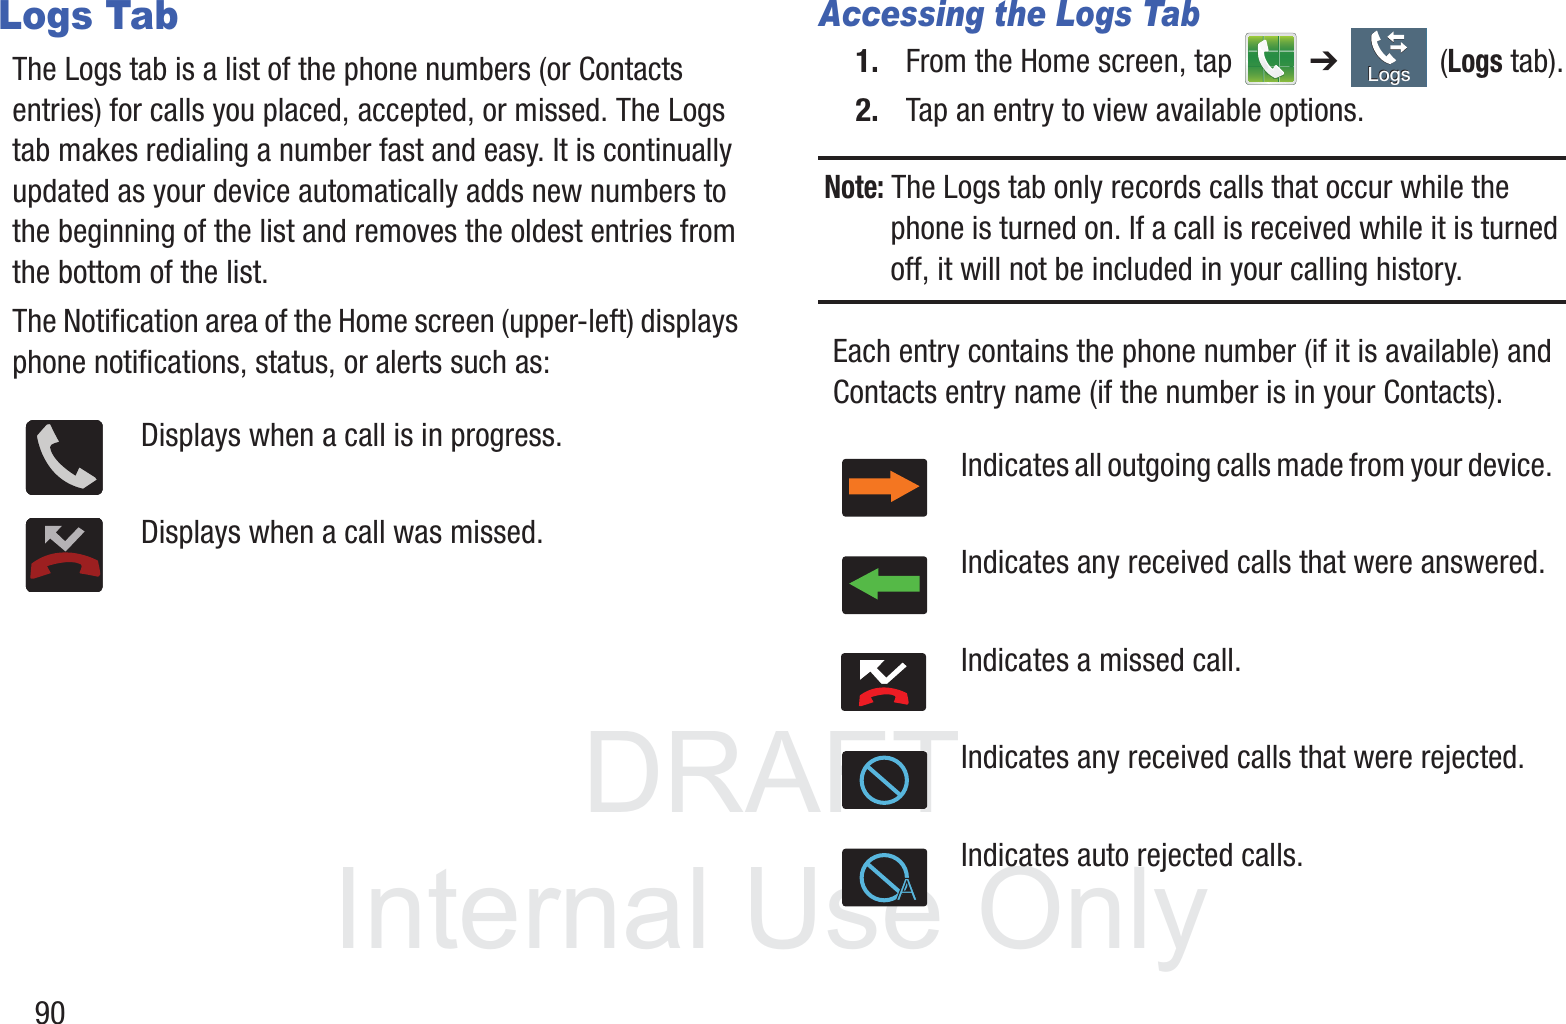 DRAFT InternalUse Only90Logs TabThe Logs tab is a list of the phone numbers (or Contacts entries) for calls you placed, accepted, or missed. The Logs tab makes redialing a number fast and easy. It is continually updated as your device automatically adds new numbers to the beginning of the list and removes the oldest entries from the bottom of the list. The Notification area of the Home screen (upper-left) displays phone notifications, status, or alerts such as:  Accessing the Logs Tab1. From the Home screen, tap   ➔  (Logs tab).2. Tap an entry to view available options.Note: The Logs tab only records calls that occur while the phone is turned on. If a call is received while it is turned off, it will not be included in your calling history.Each entry contains the phone number (if it is available) and Contacts entry name (if the number is in your Contacts).  Displays when a call is in progress.Displays when a call was missed.Indicates all outgoing calls made from your device.Indicates any received calls that were answered.Indicates a missed call.Indicates any received calls that were rejected.Indicates auto rejected calls.LogsLogs